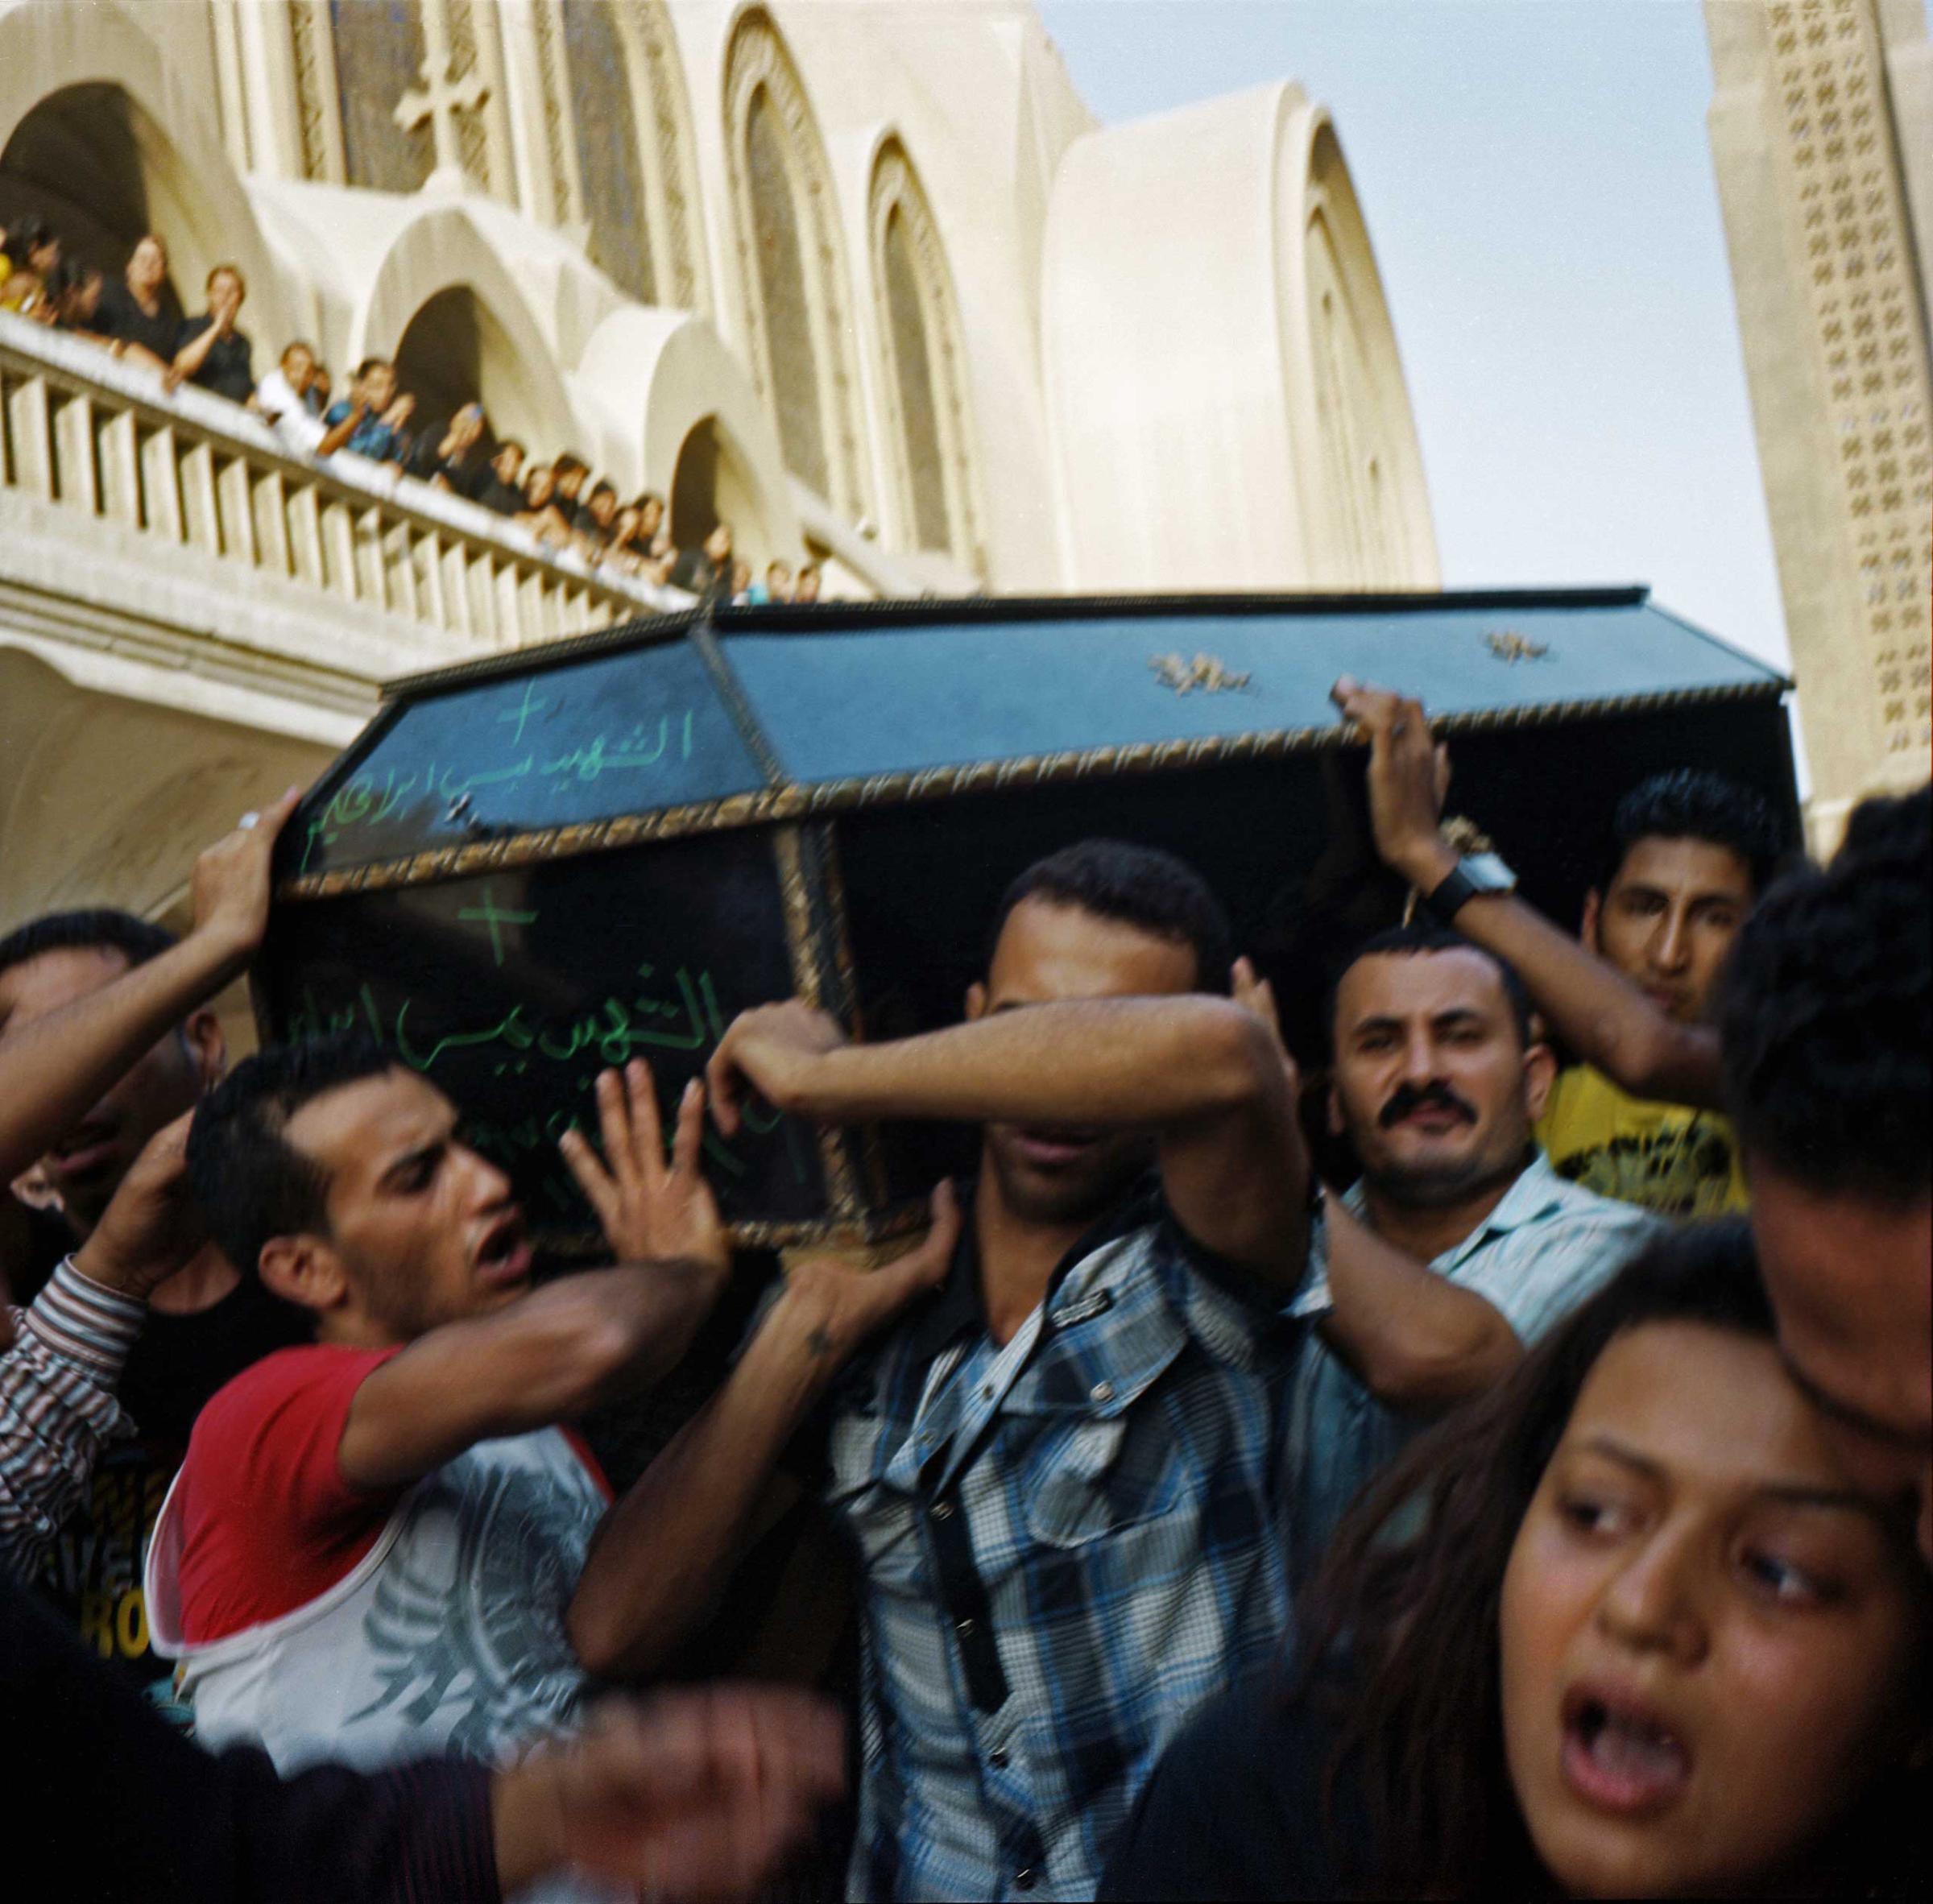 Relatives of victims carrying coffins out of the Abasseya Cathedral to be buried following violence that took place in front of Maspero TV building on October 9 - 10, 2011 resulting in 28 mostly Coptic deaths and 212 injured. The clashes occurred between Copts demonstrating peacefully against an attack on a church in Upper Egypt and the Egyptian Army and security forces. The Coptic demonstration was violently dispersed by tanks and armored vehicles, as well as random shooting in the crowd the night of October 9 - 10, 2011. Cairo, Egypt. October 10, 2011